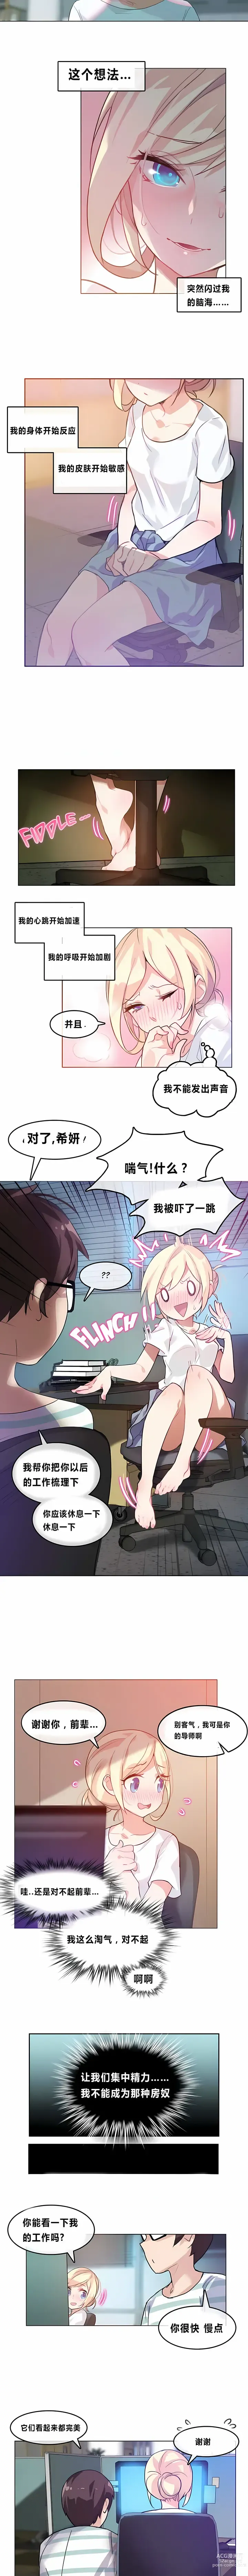 Page 17 of doujinshi A Pervert's Daily Life 第1-4季 1-144